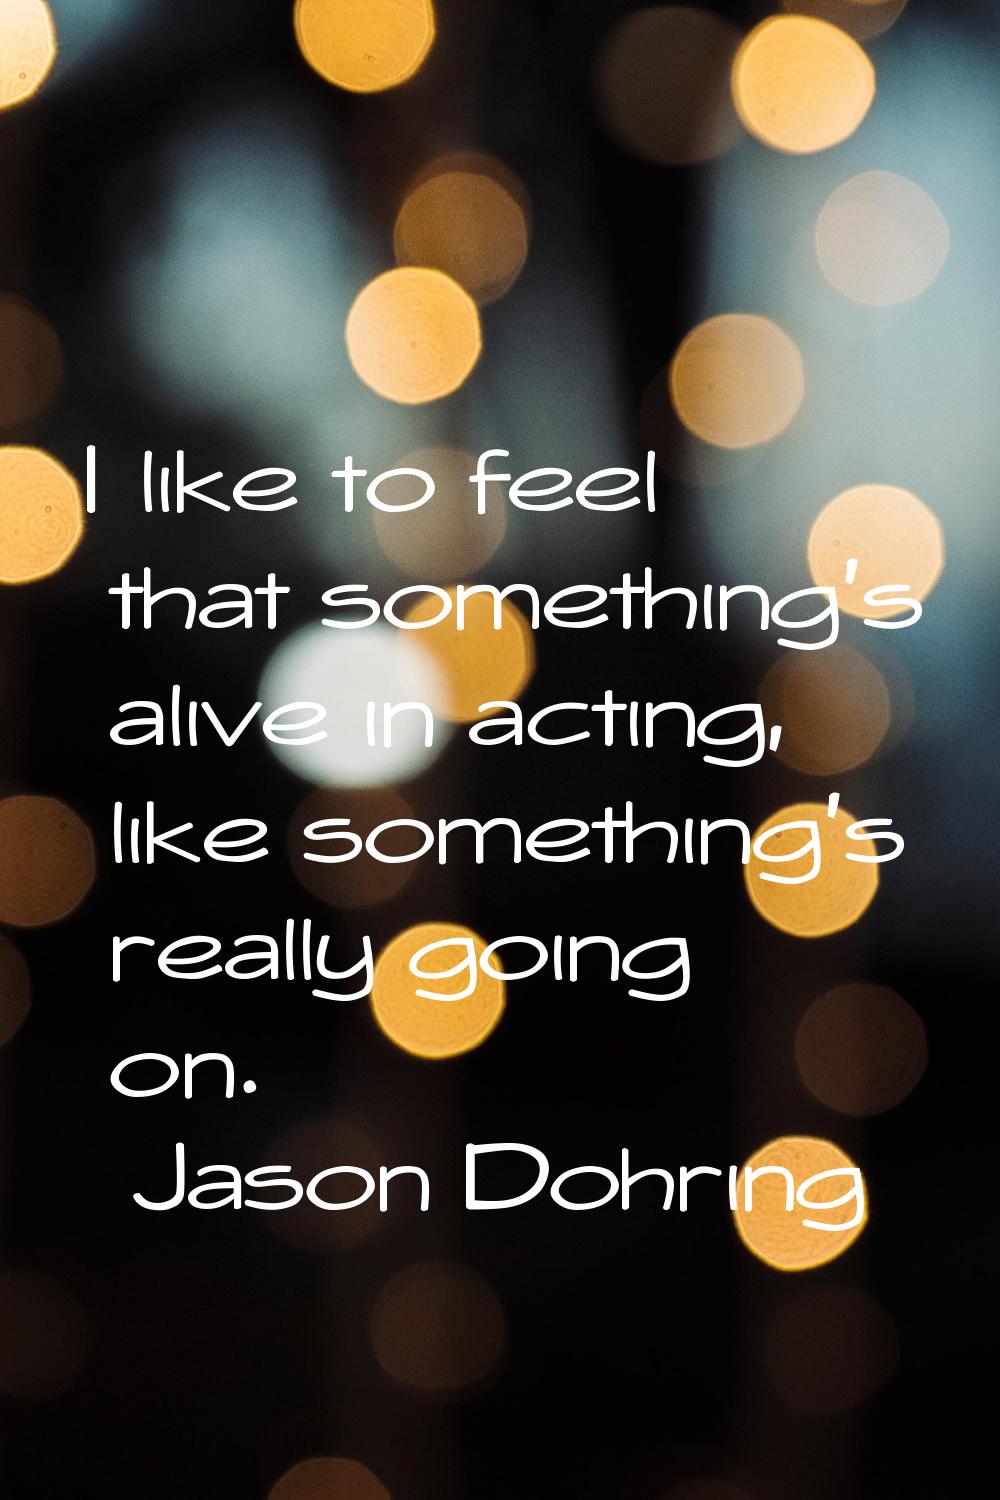 I like to feel that something's alive in acting, like something's really going on.